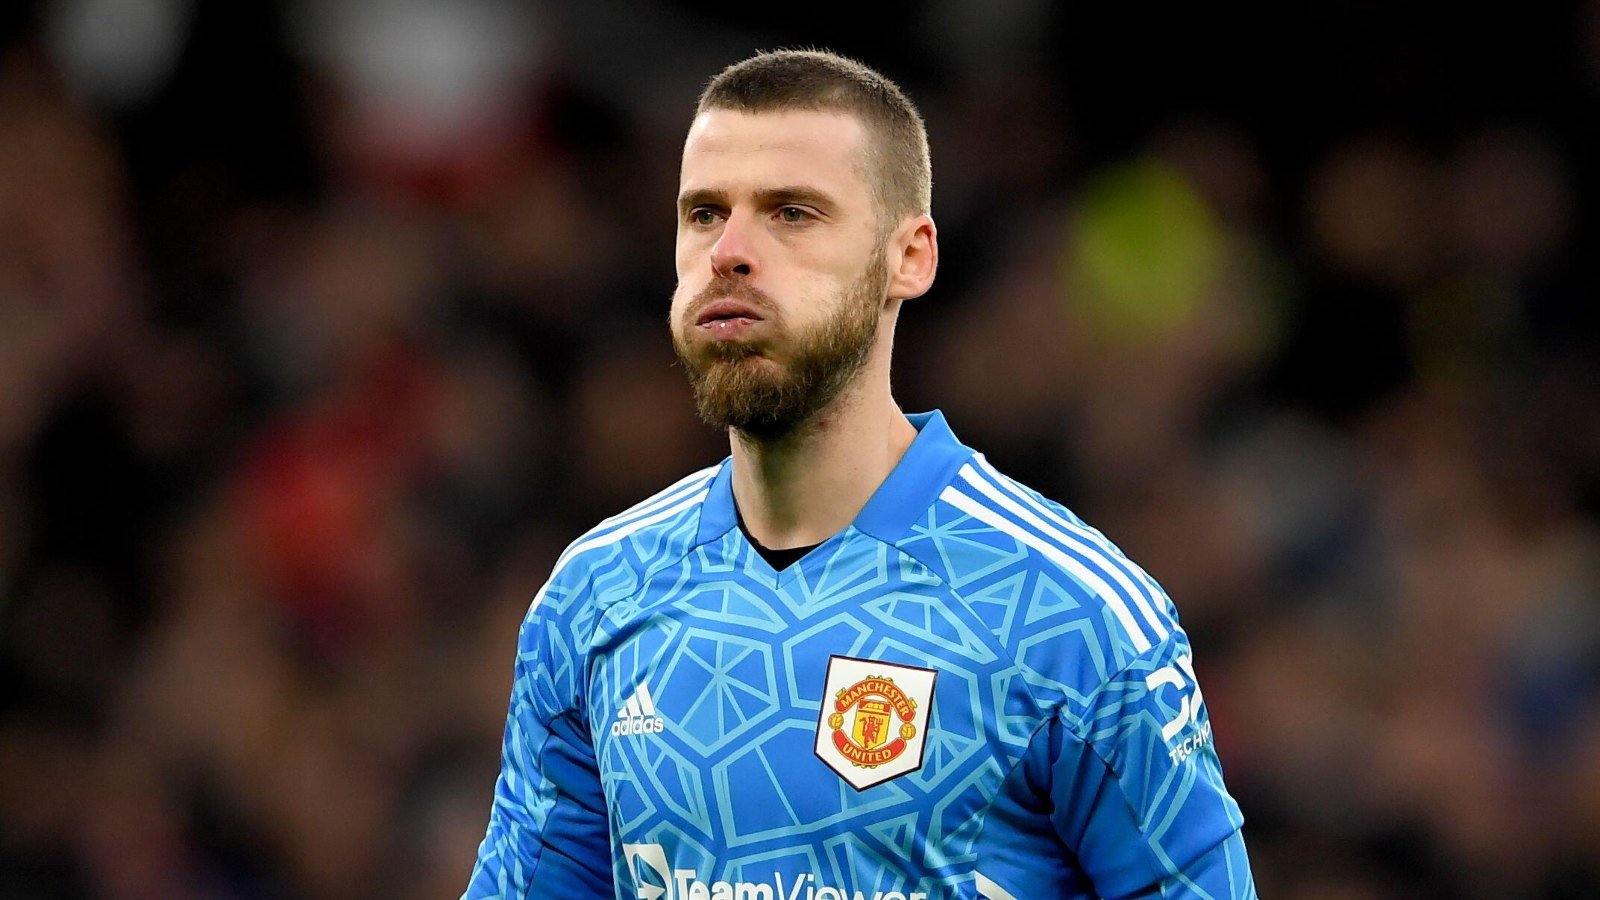 David De Gea To Sign New Manchester United Contract On Reduced Wages